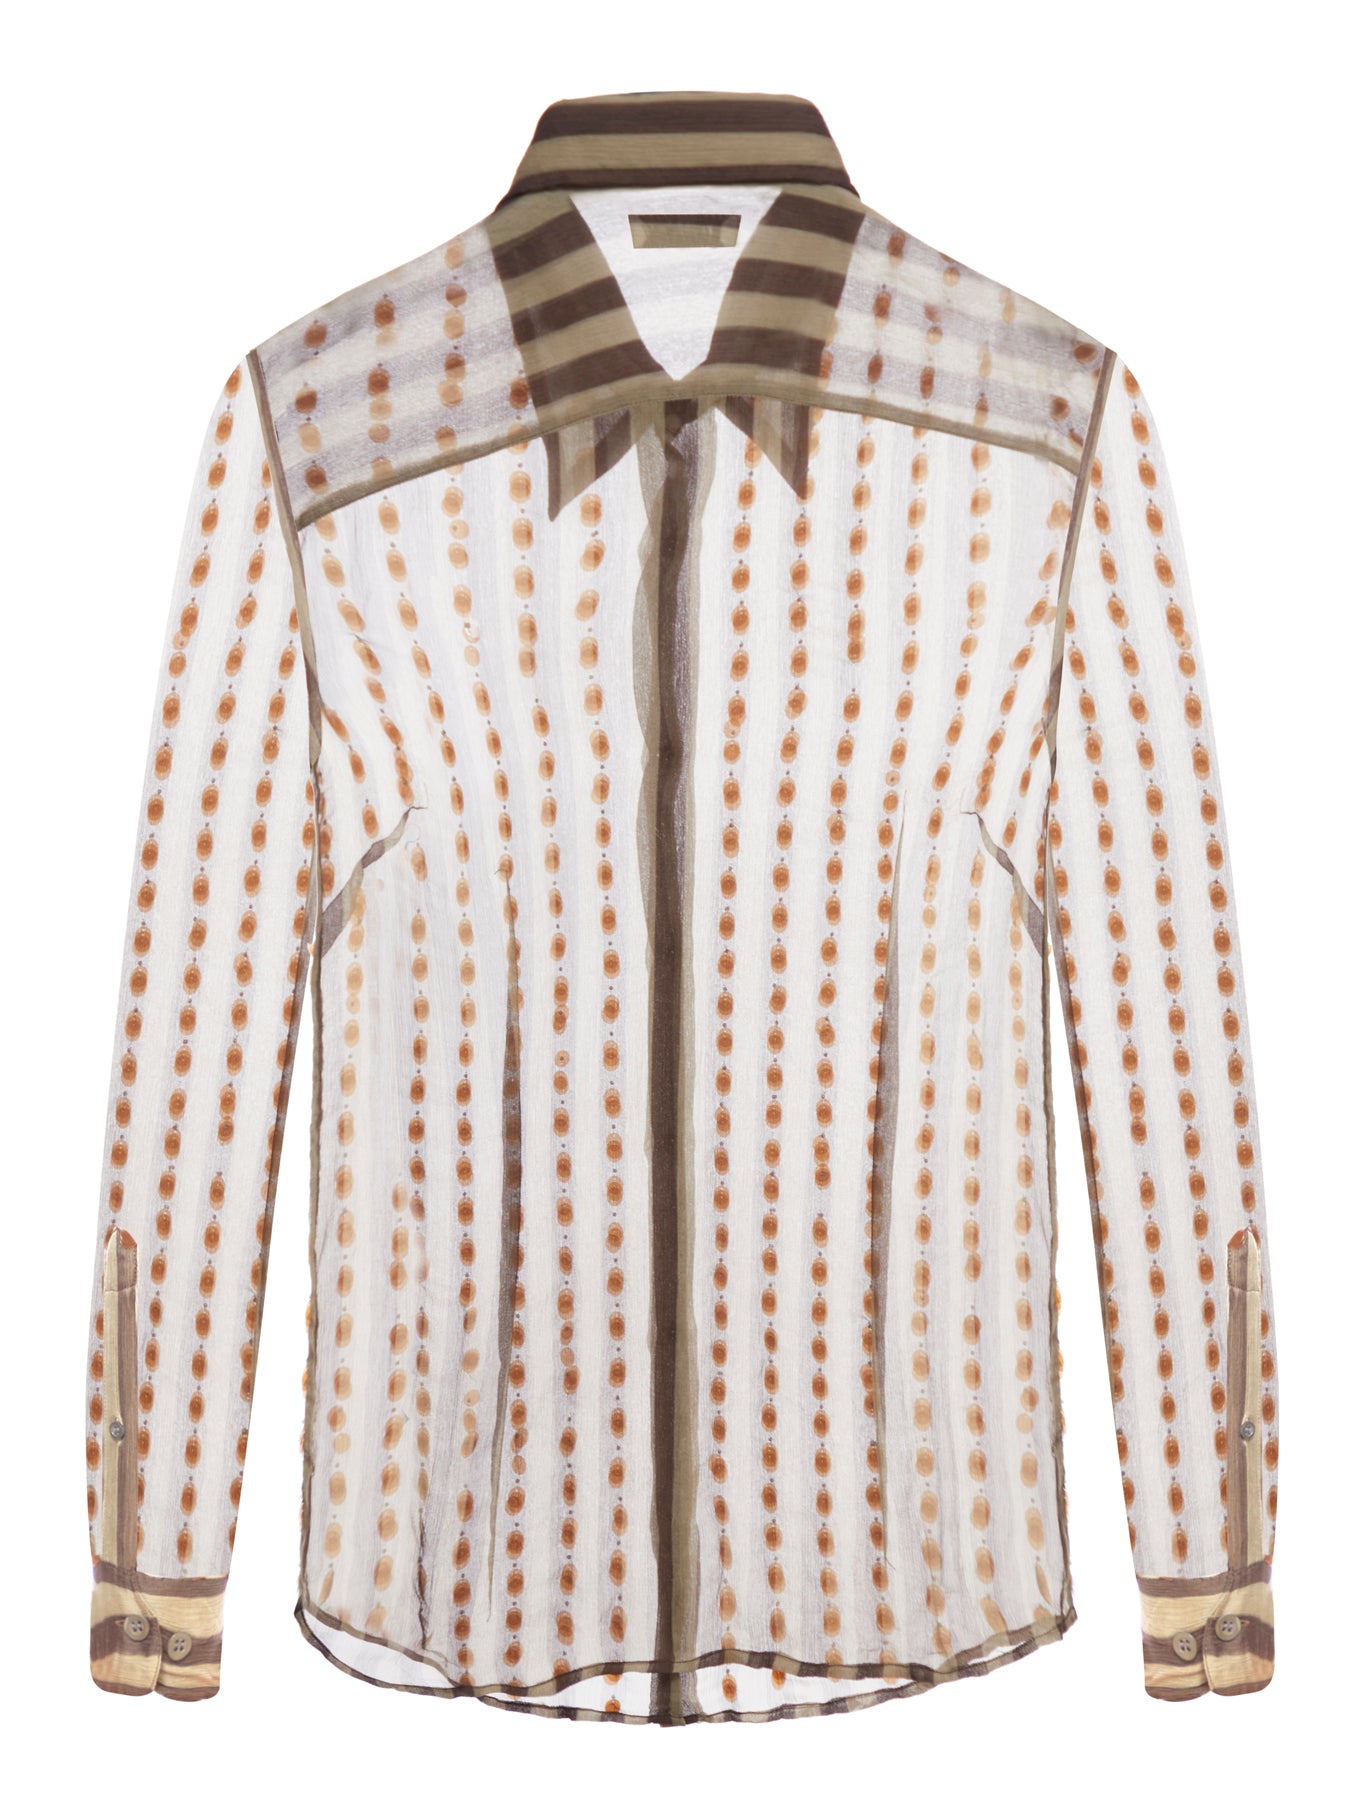 silk shirt printed with two-tone stripes